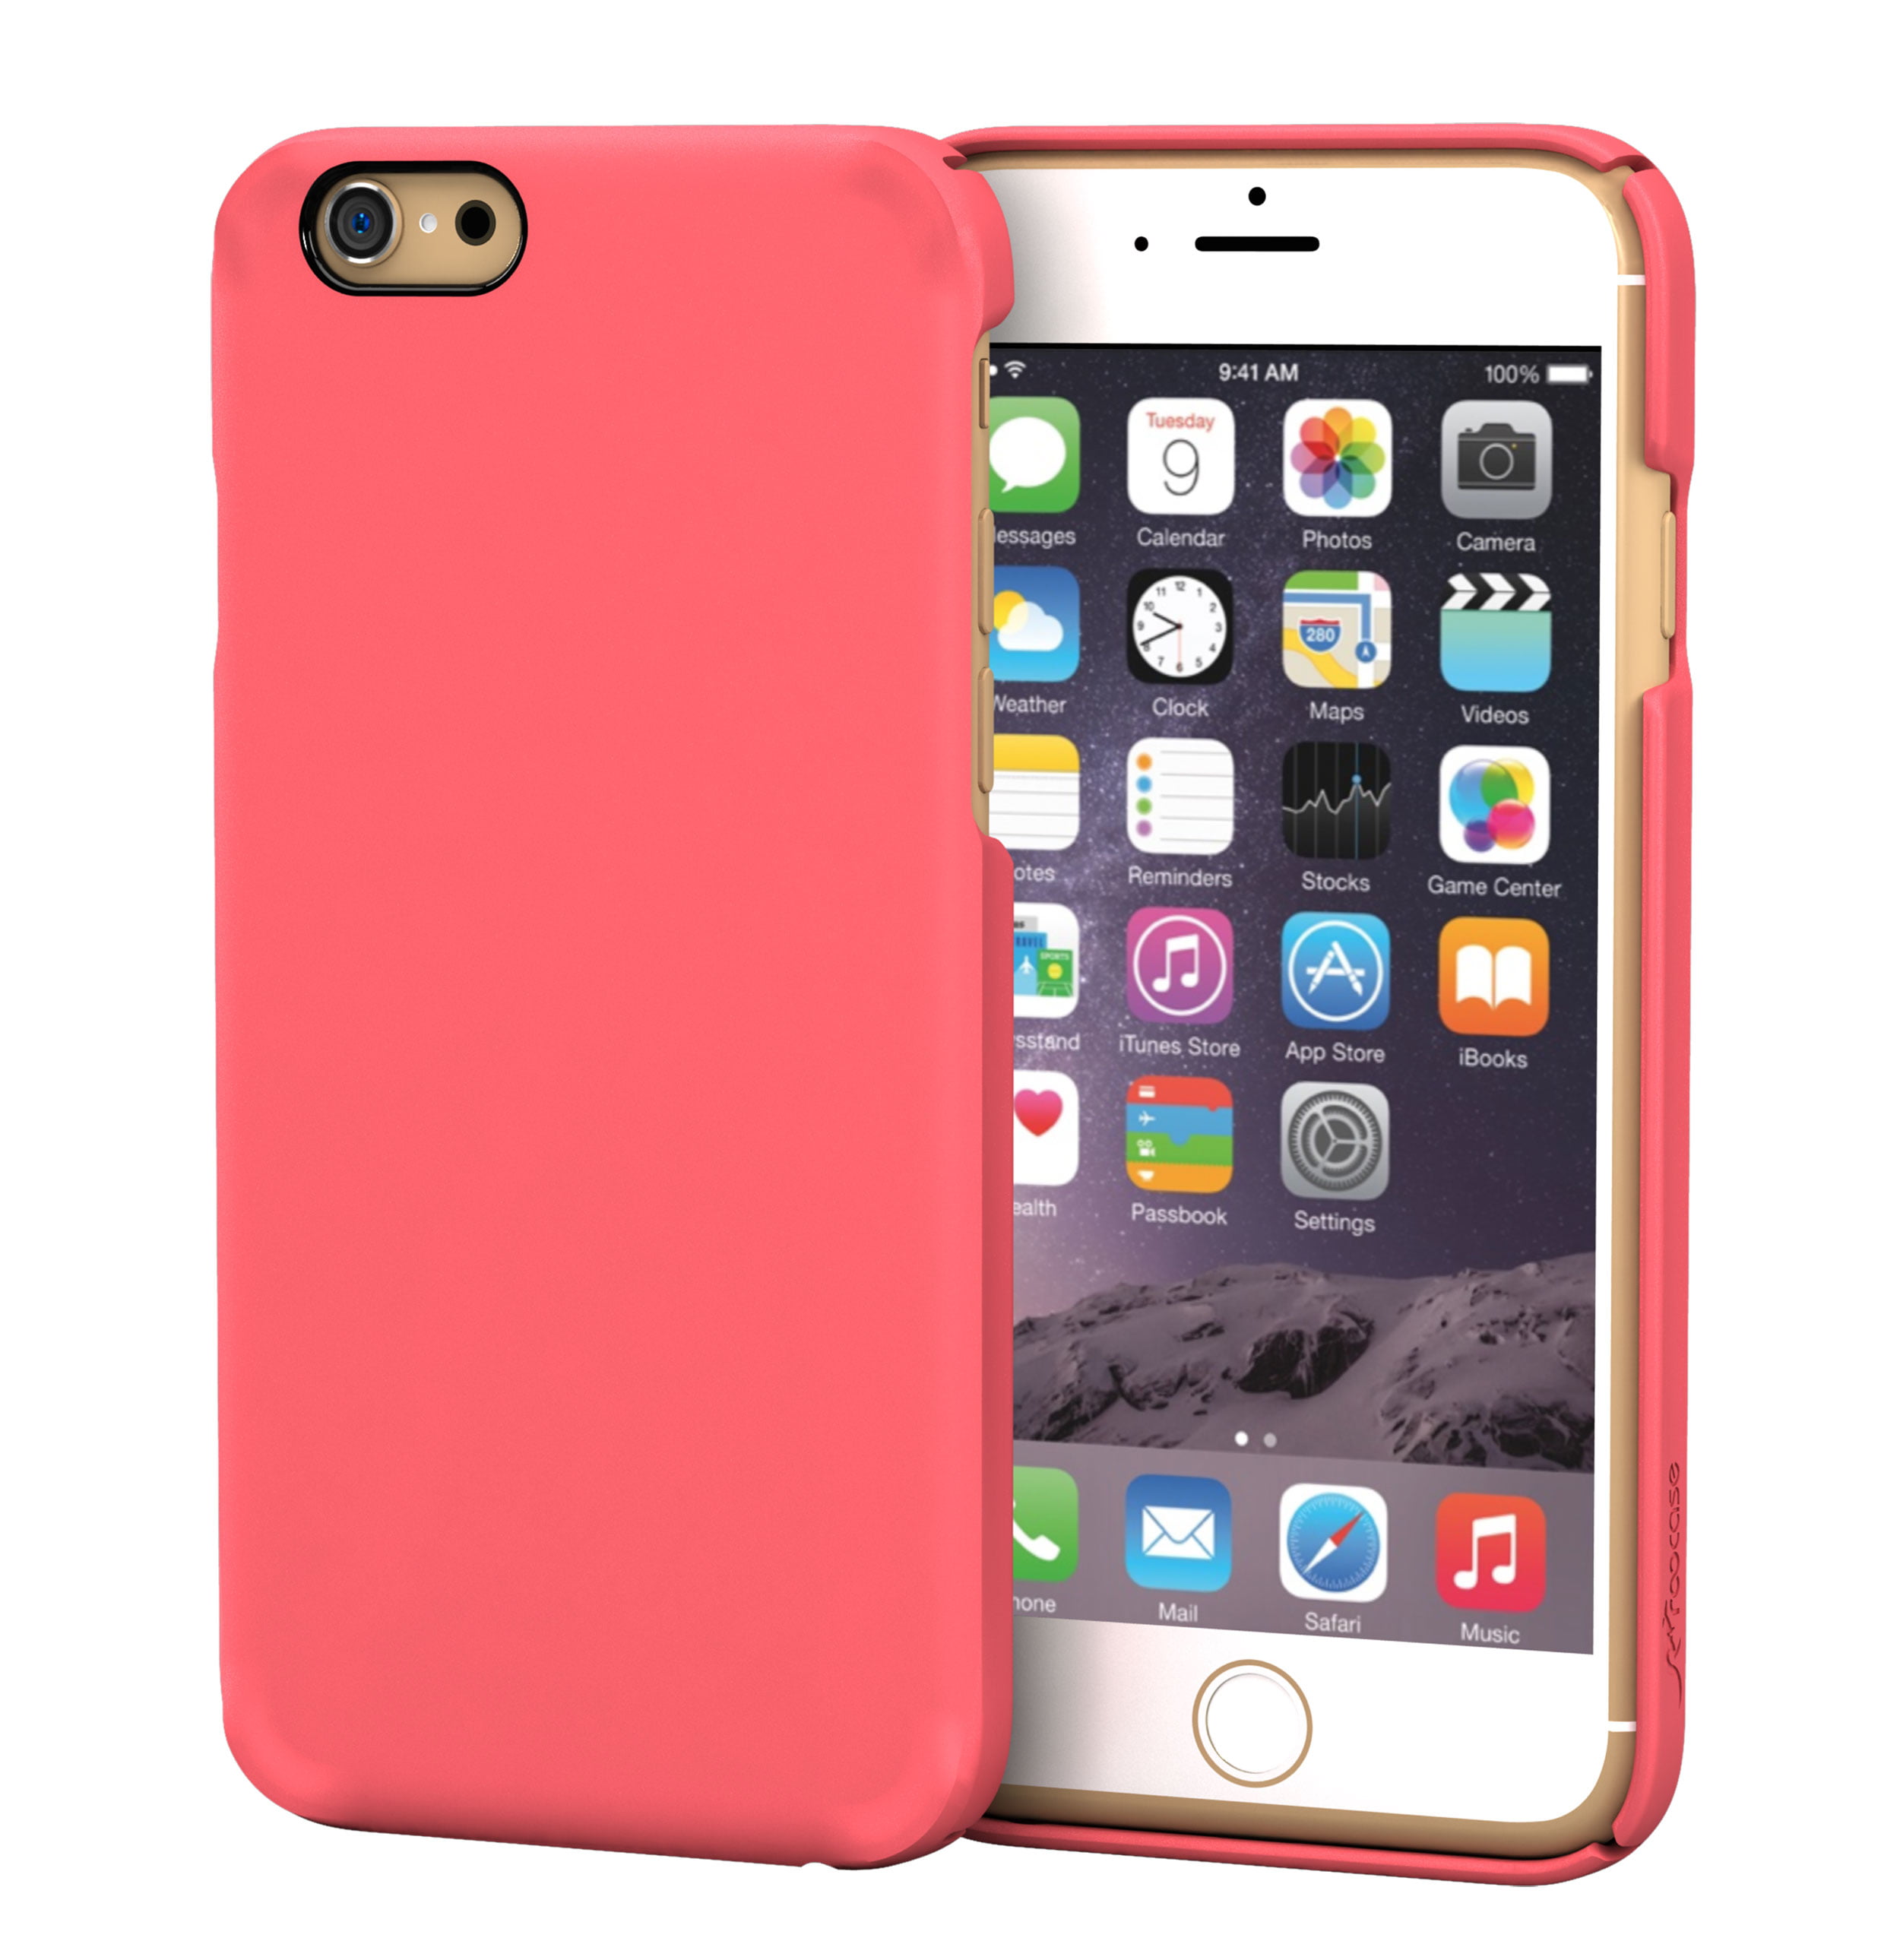 Apple iPhone 6/6s Silicone Case (Light Pink) MM622ZM/A B&H Photo